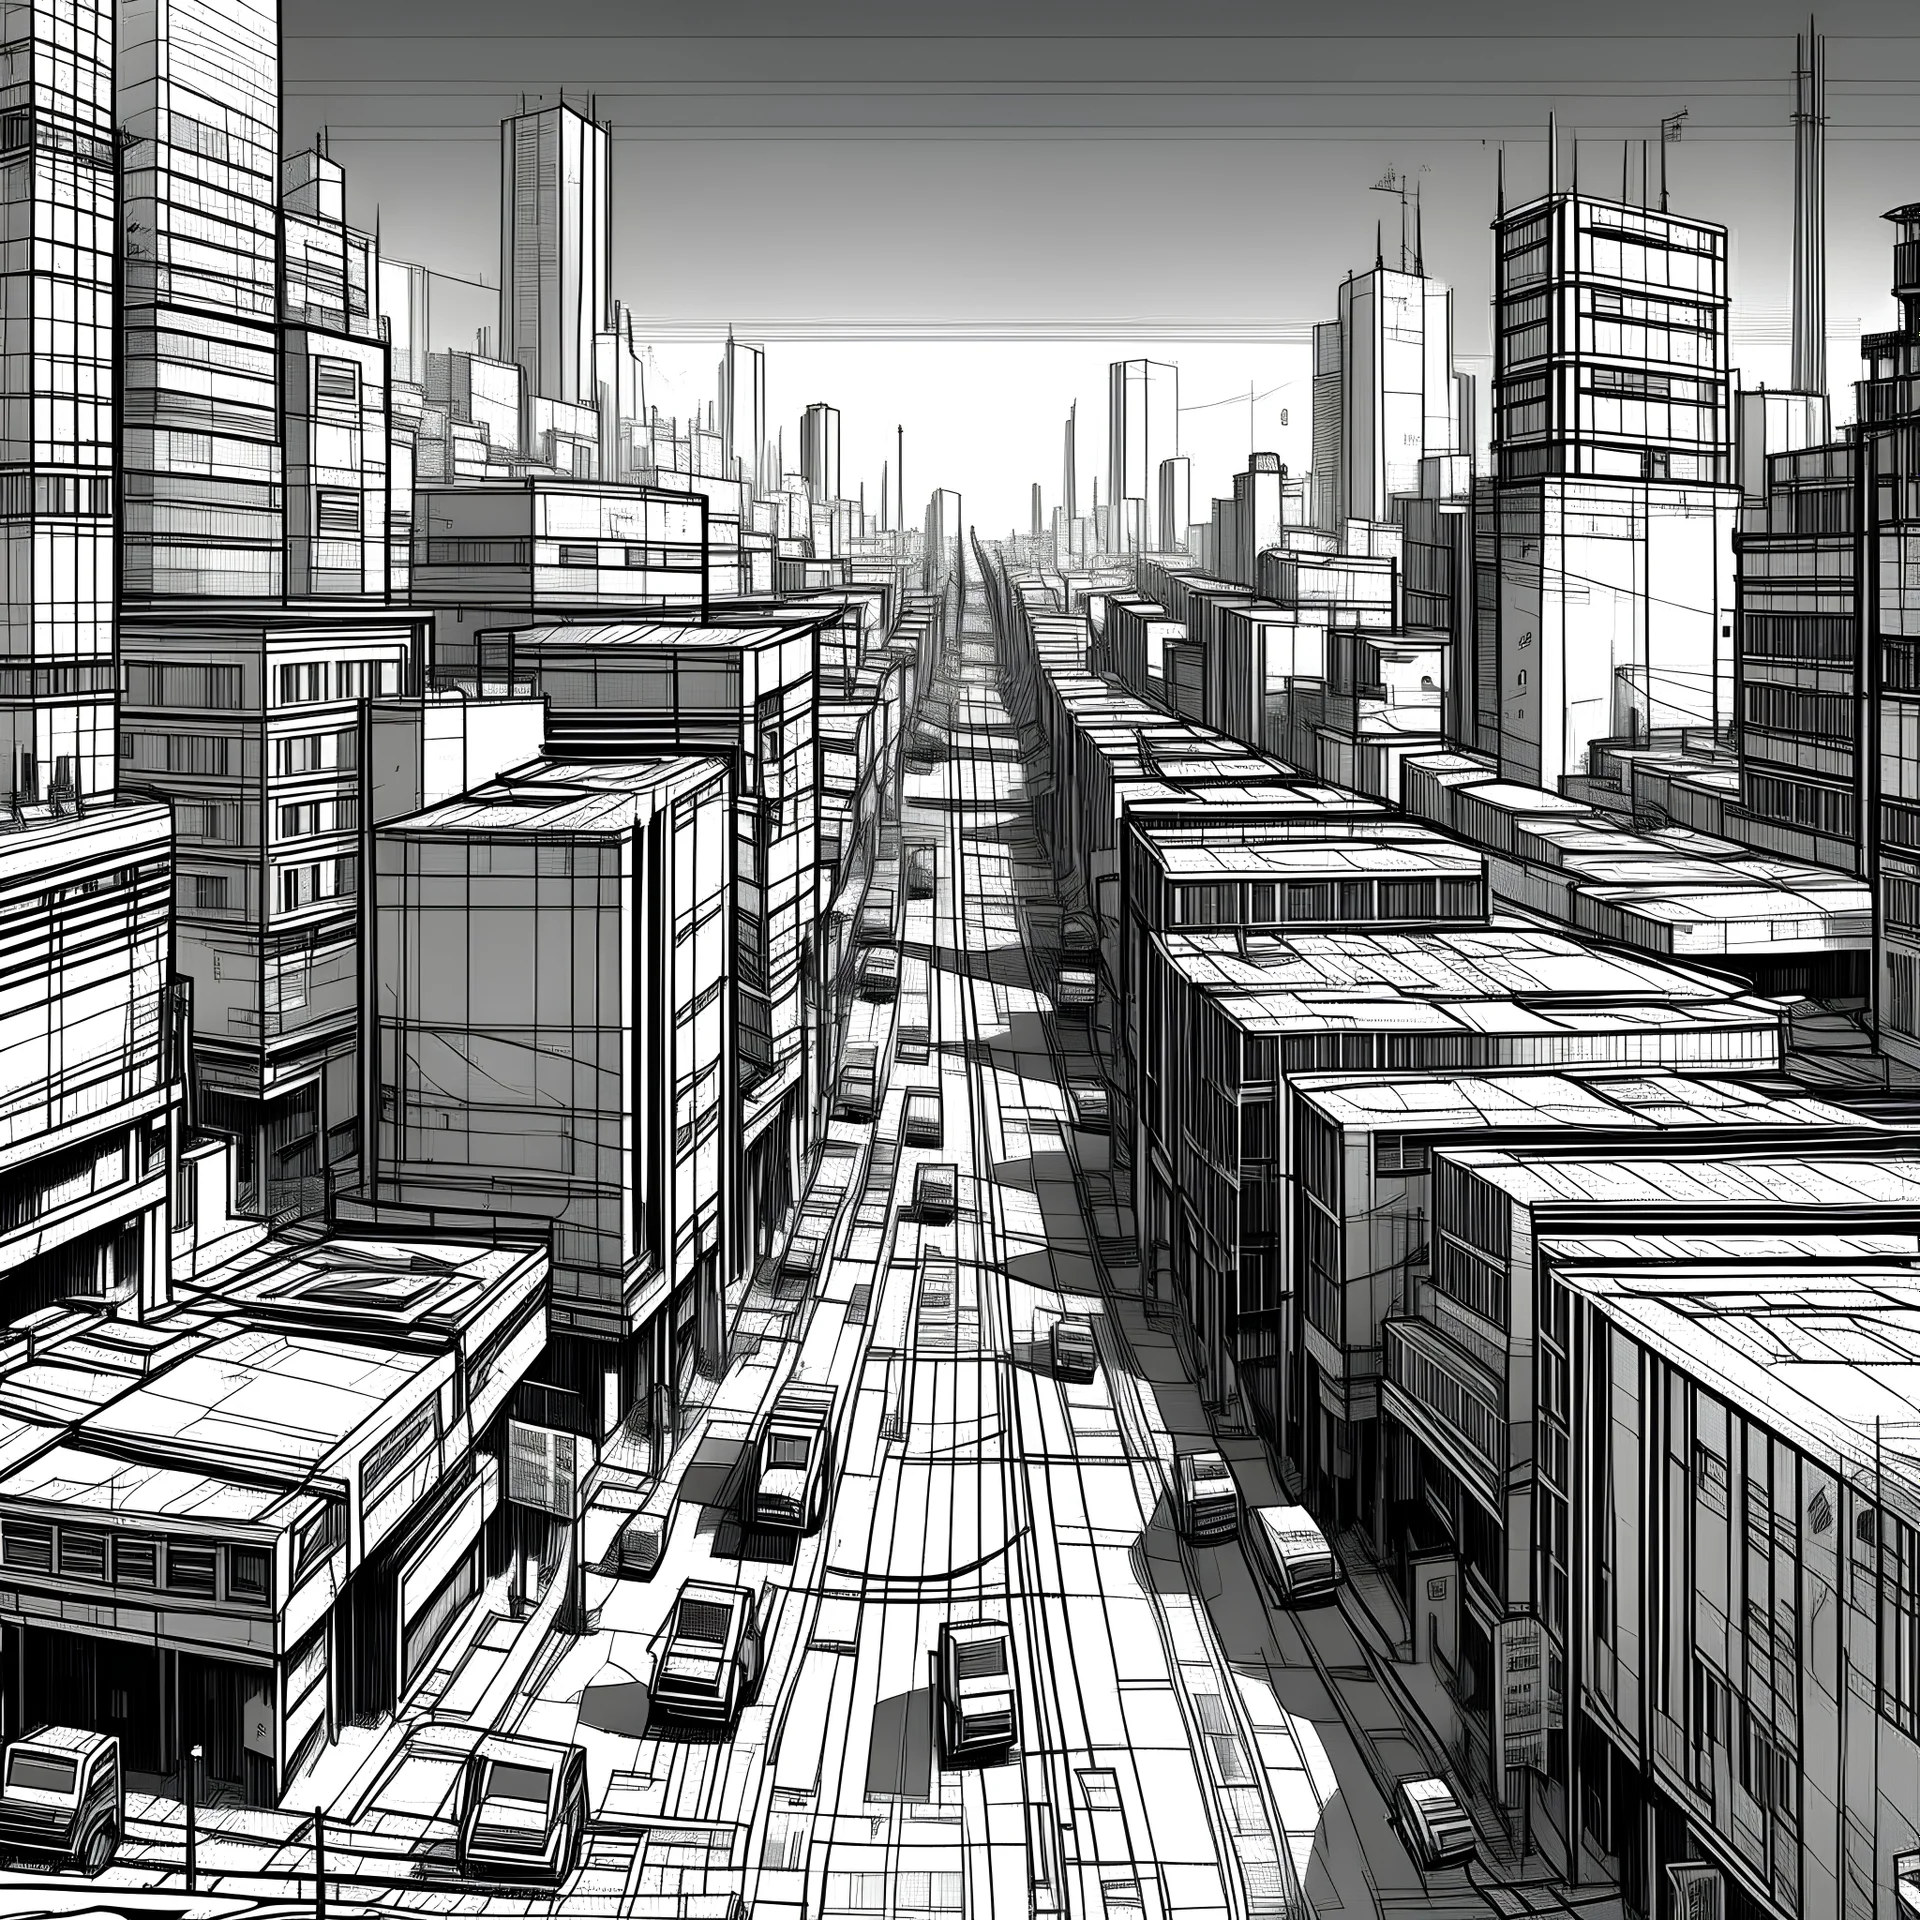 illustrate emptiness in an urban dense cityscape at a large scale